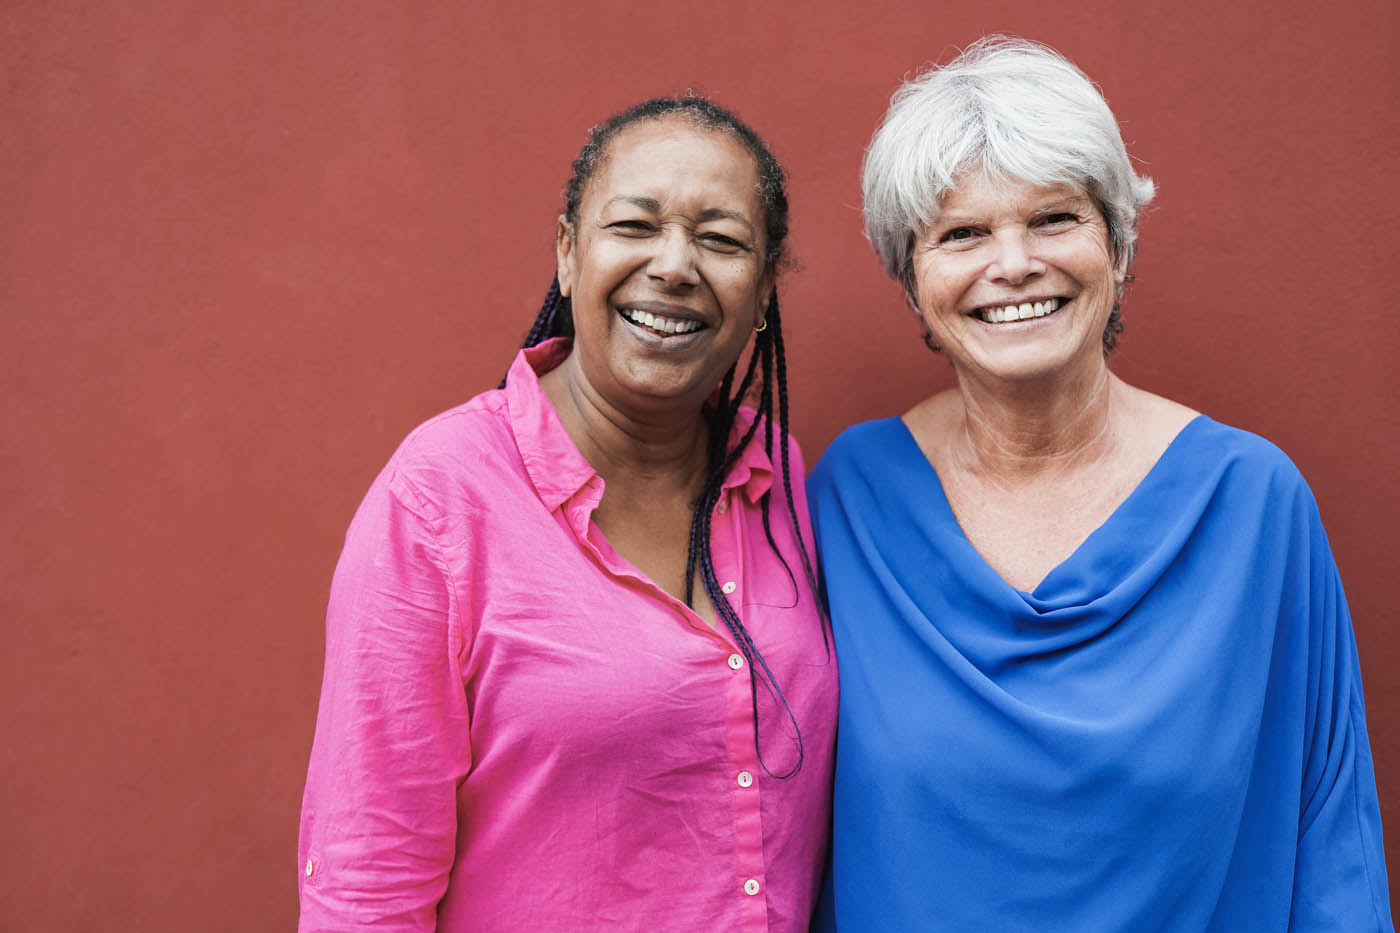 Two older women standing in front of a red wall - Light Lounge provides MS pain management.